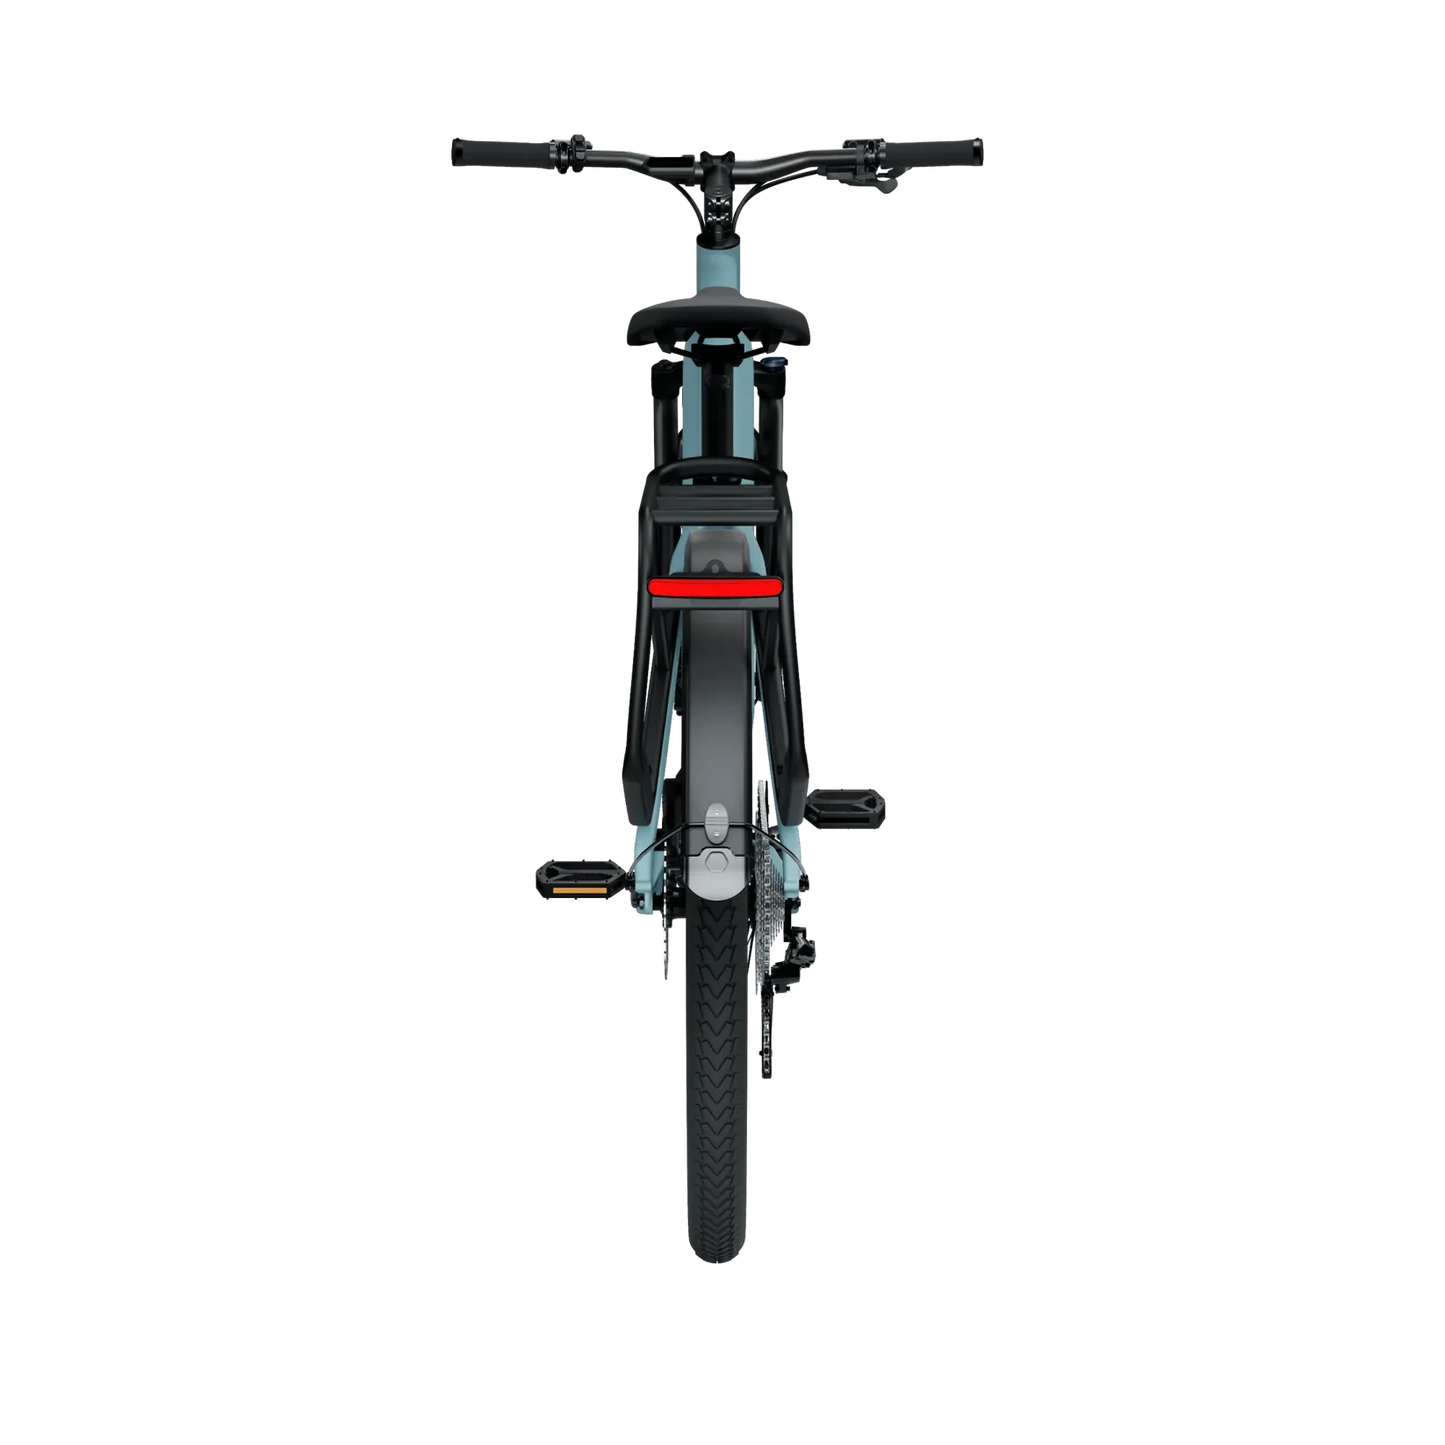 Front view of a Tenways AGO X electric bicycle with a mid-drive motor against a black background, featuring a headlight and a visible suspension fork.